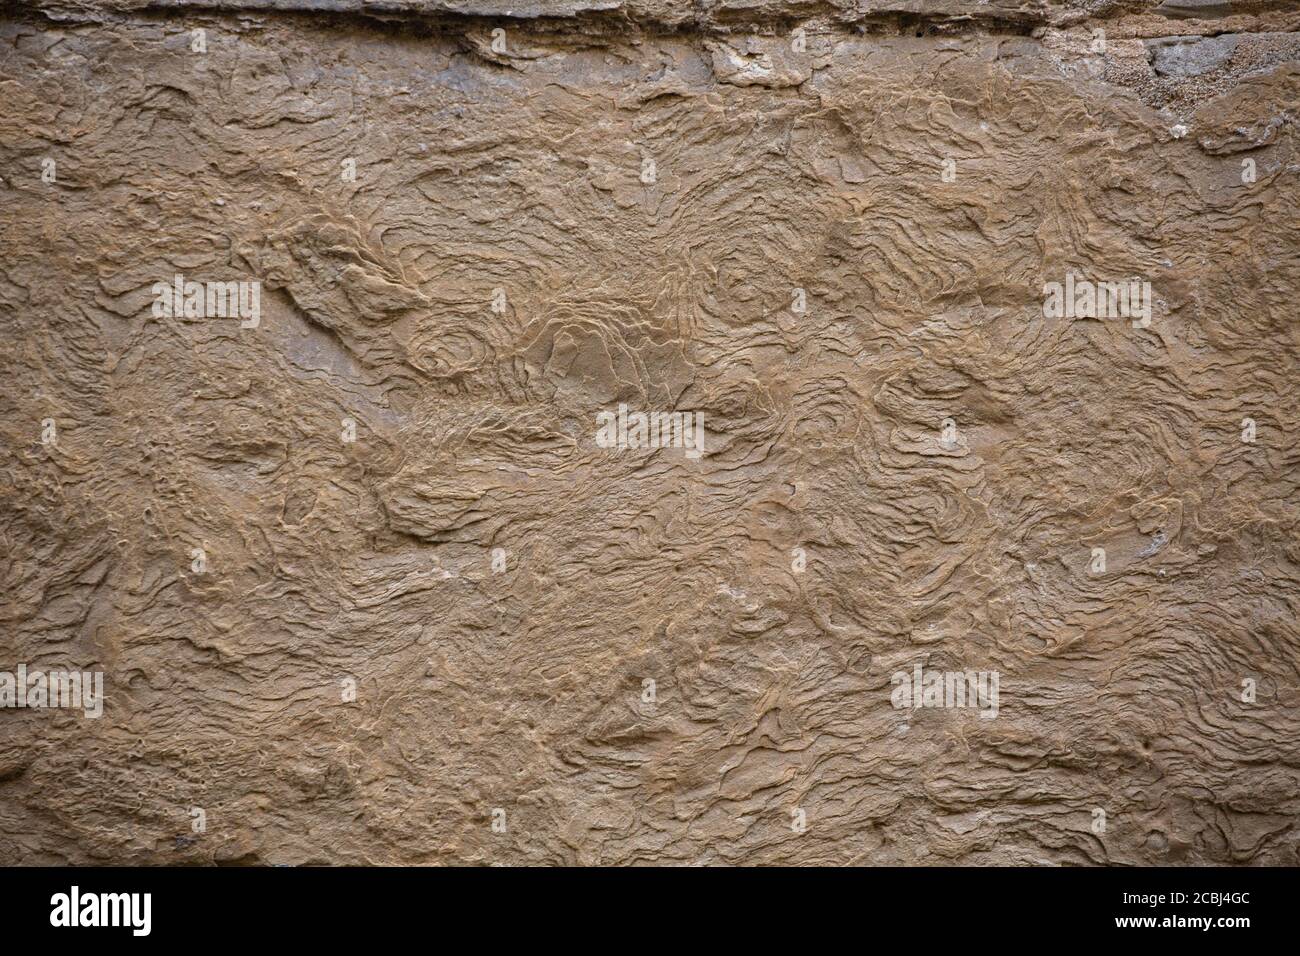 Exfoliating texture of old building stone. Close up shot. Abstract grunge background Stock Photo